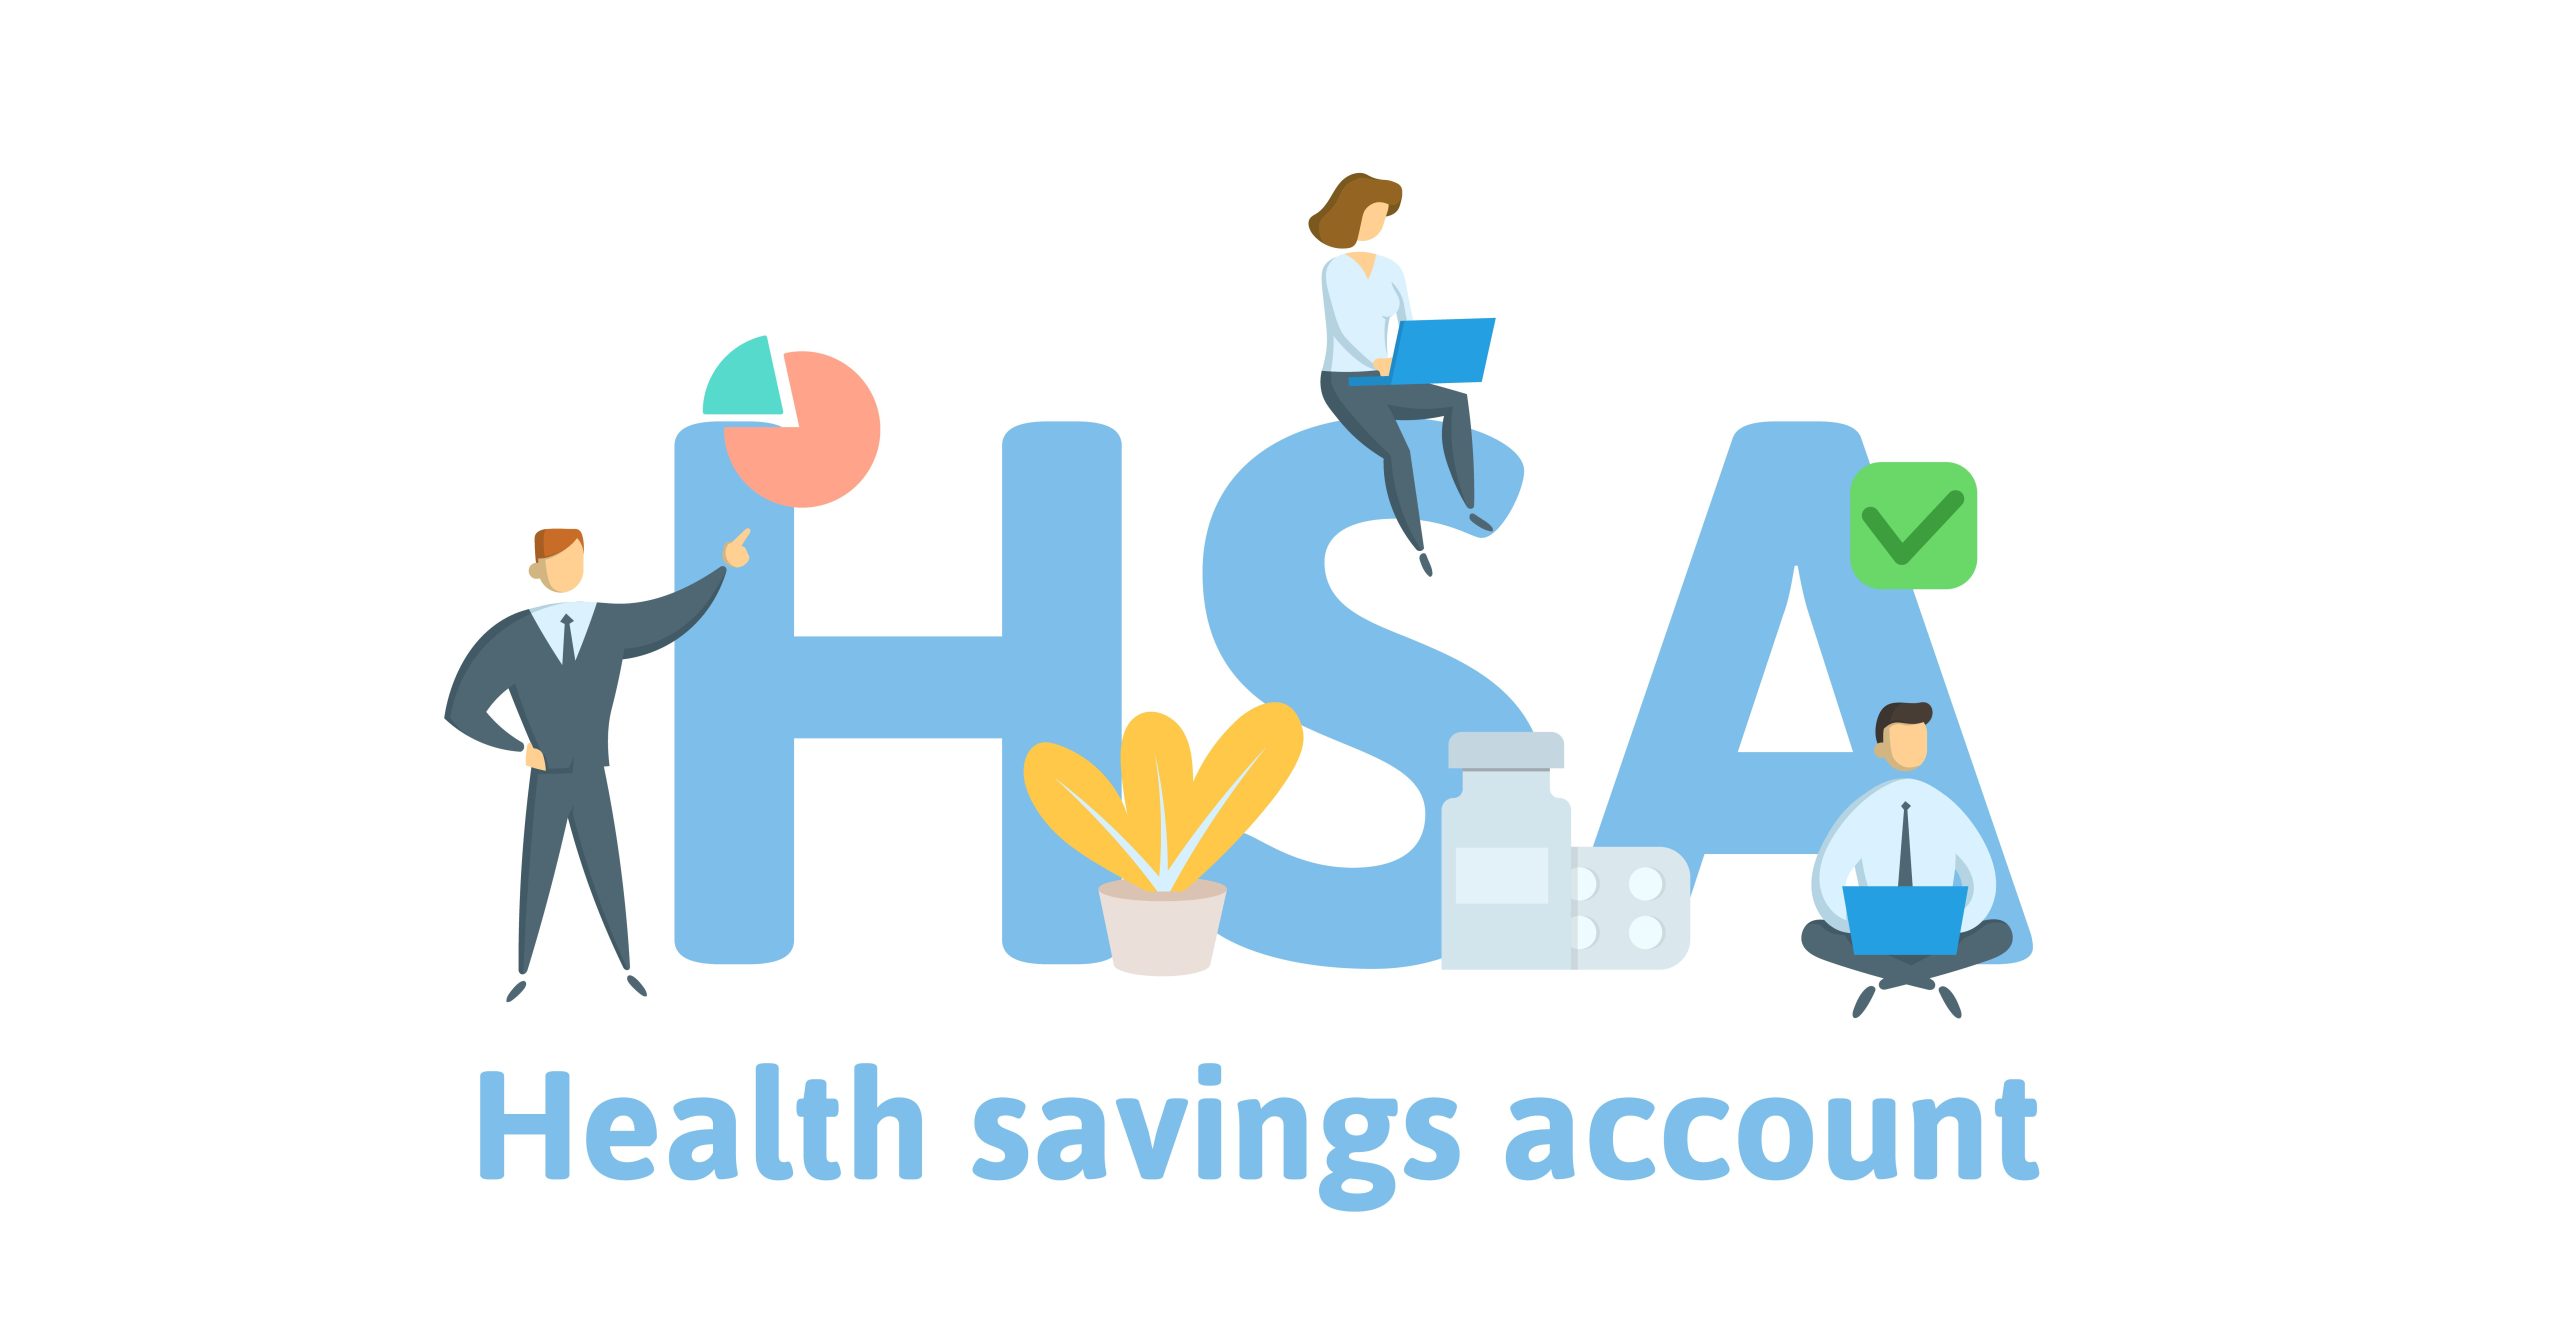 HSA, Health Savings Account. Concept with keywords, letters and icons. Flat vector illustration. Isolated on white background.